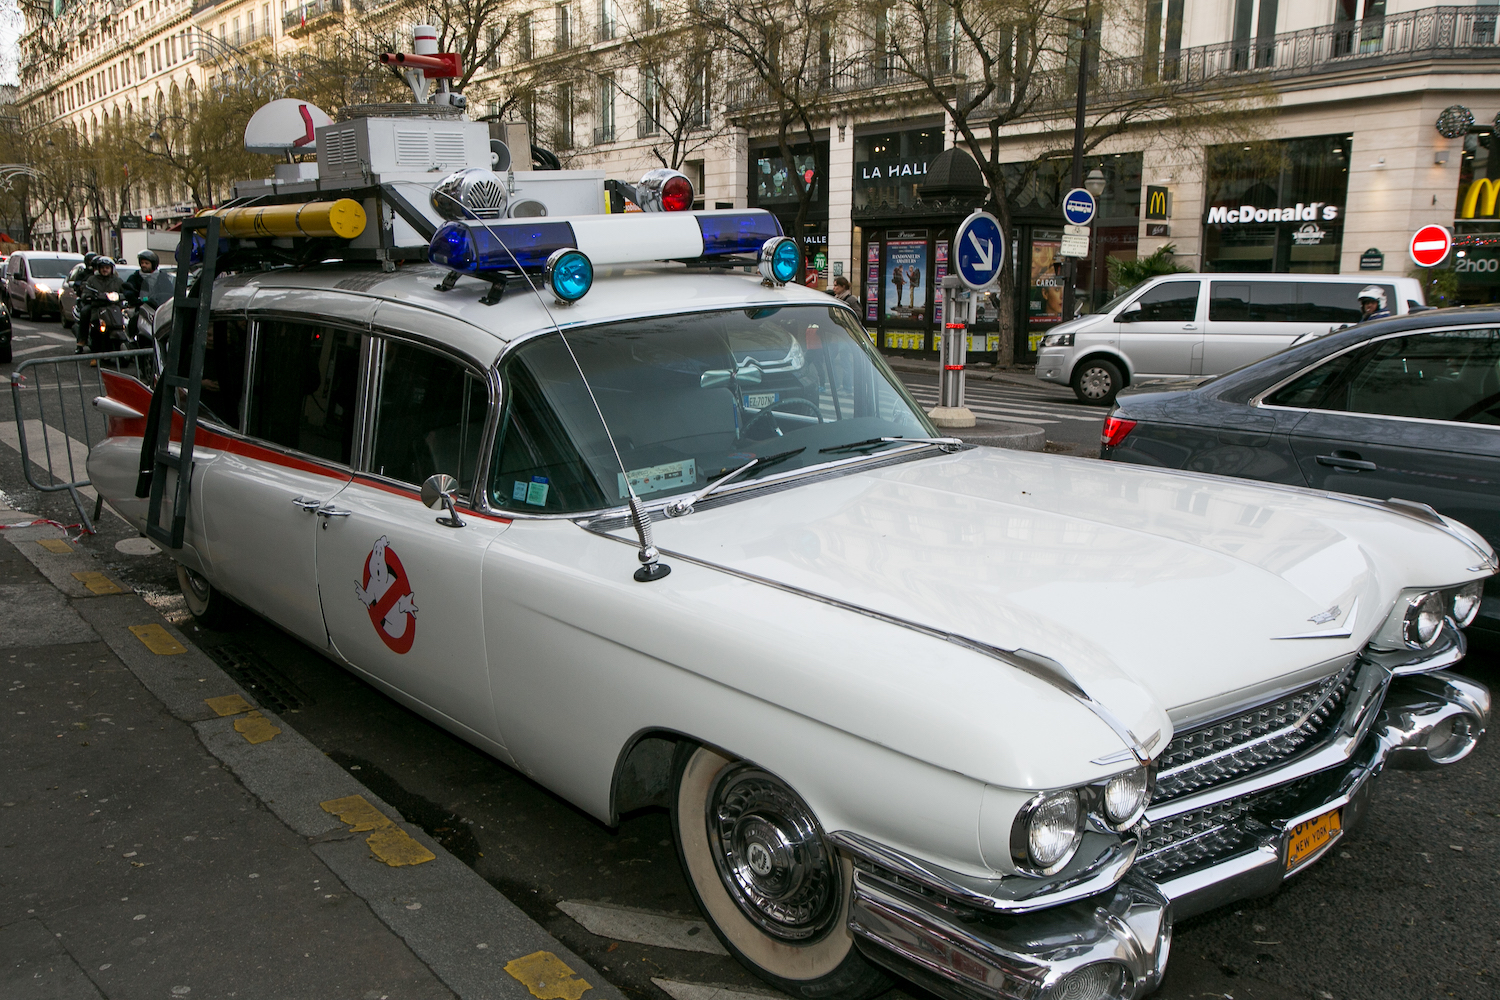 This 1959 Cadillac Series 62 is a Ghostbusters Ectomobile replica | Marc Piasecki/Getty Images